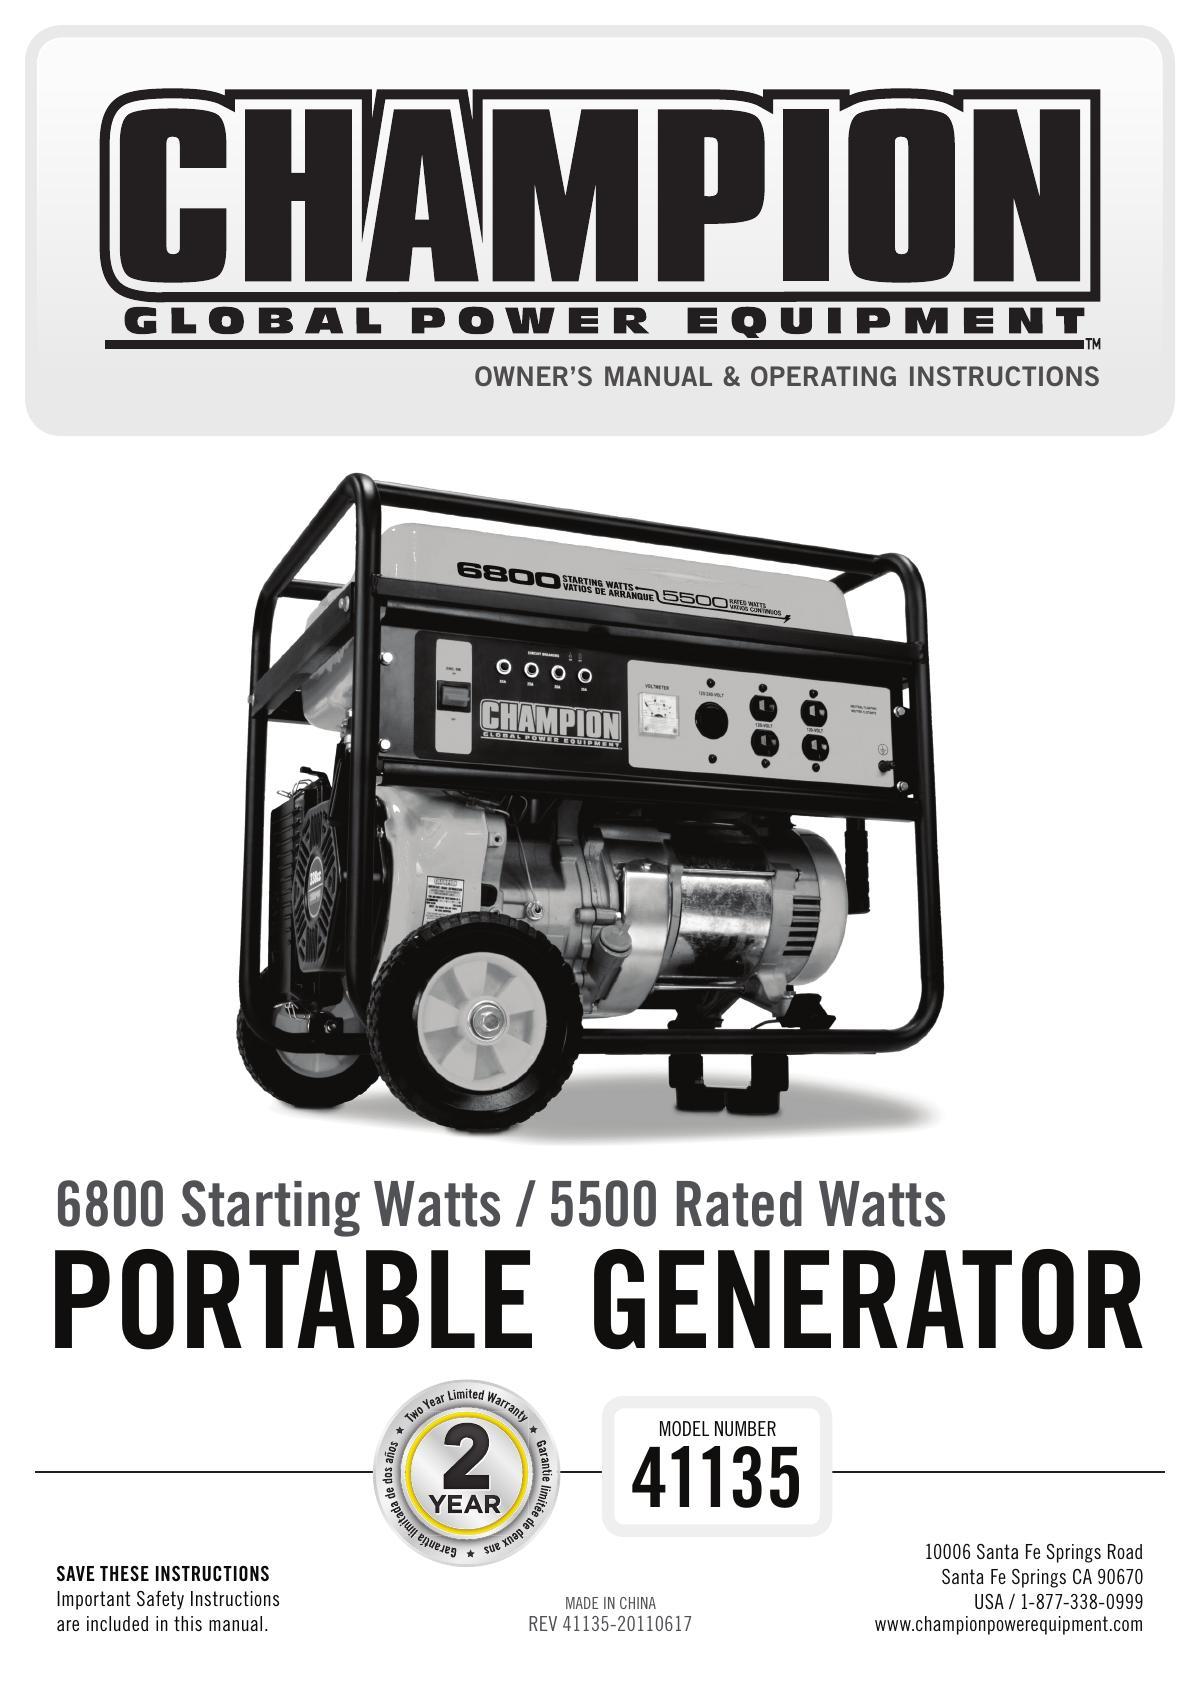 champpin-globaldower-dqmemt-owners-manual-operating-instructions-for-model-number-41135-portable-generator.pdf